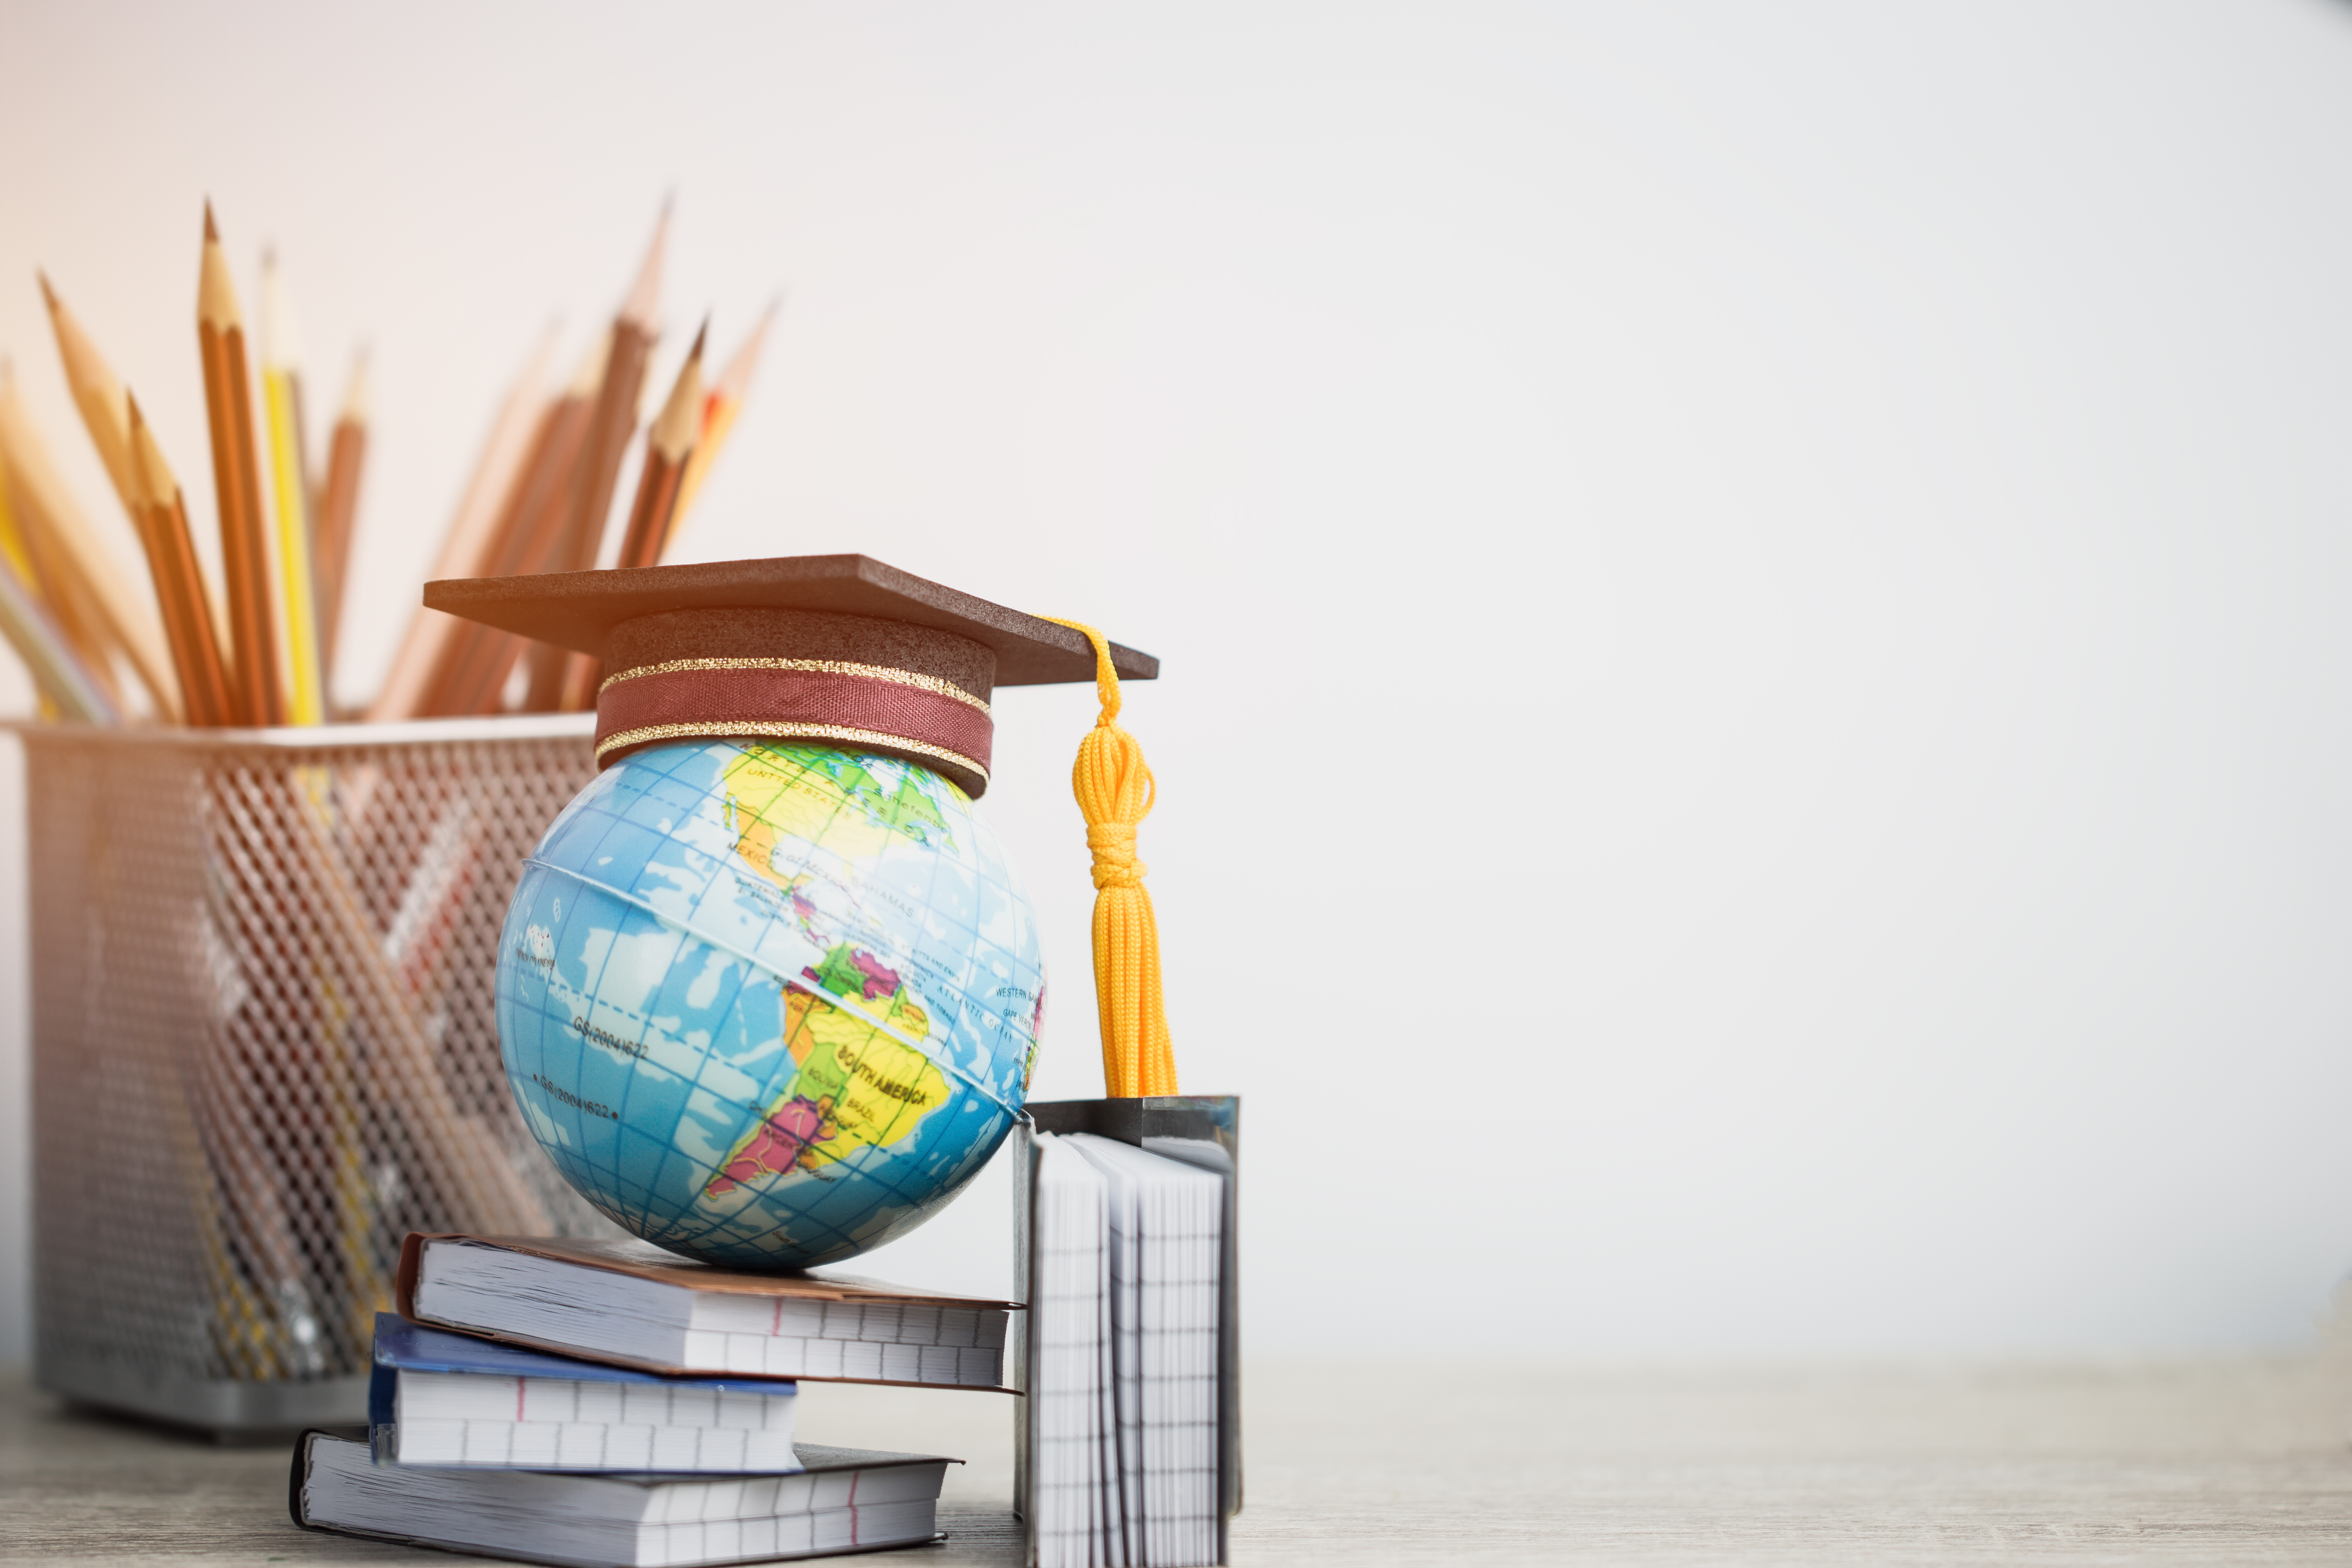 Global education, higher education. Graduation hat on models globe, books with pencils on wood white background.